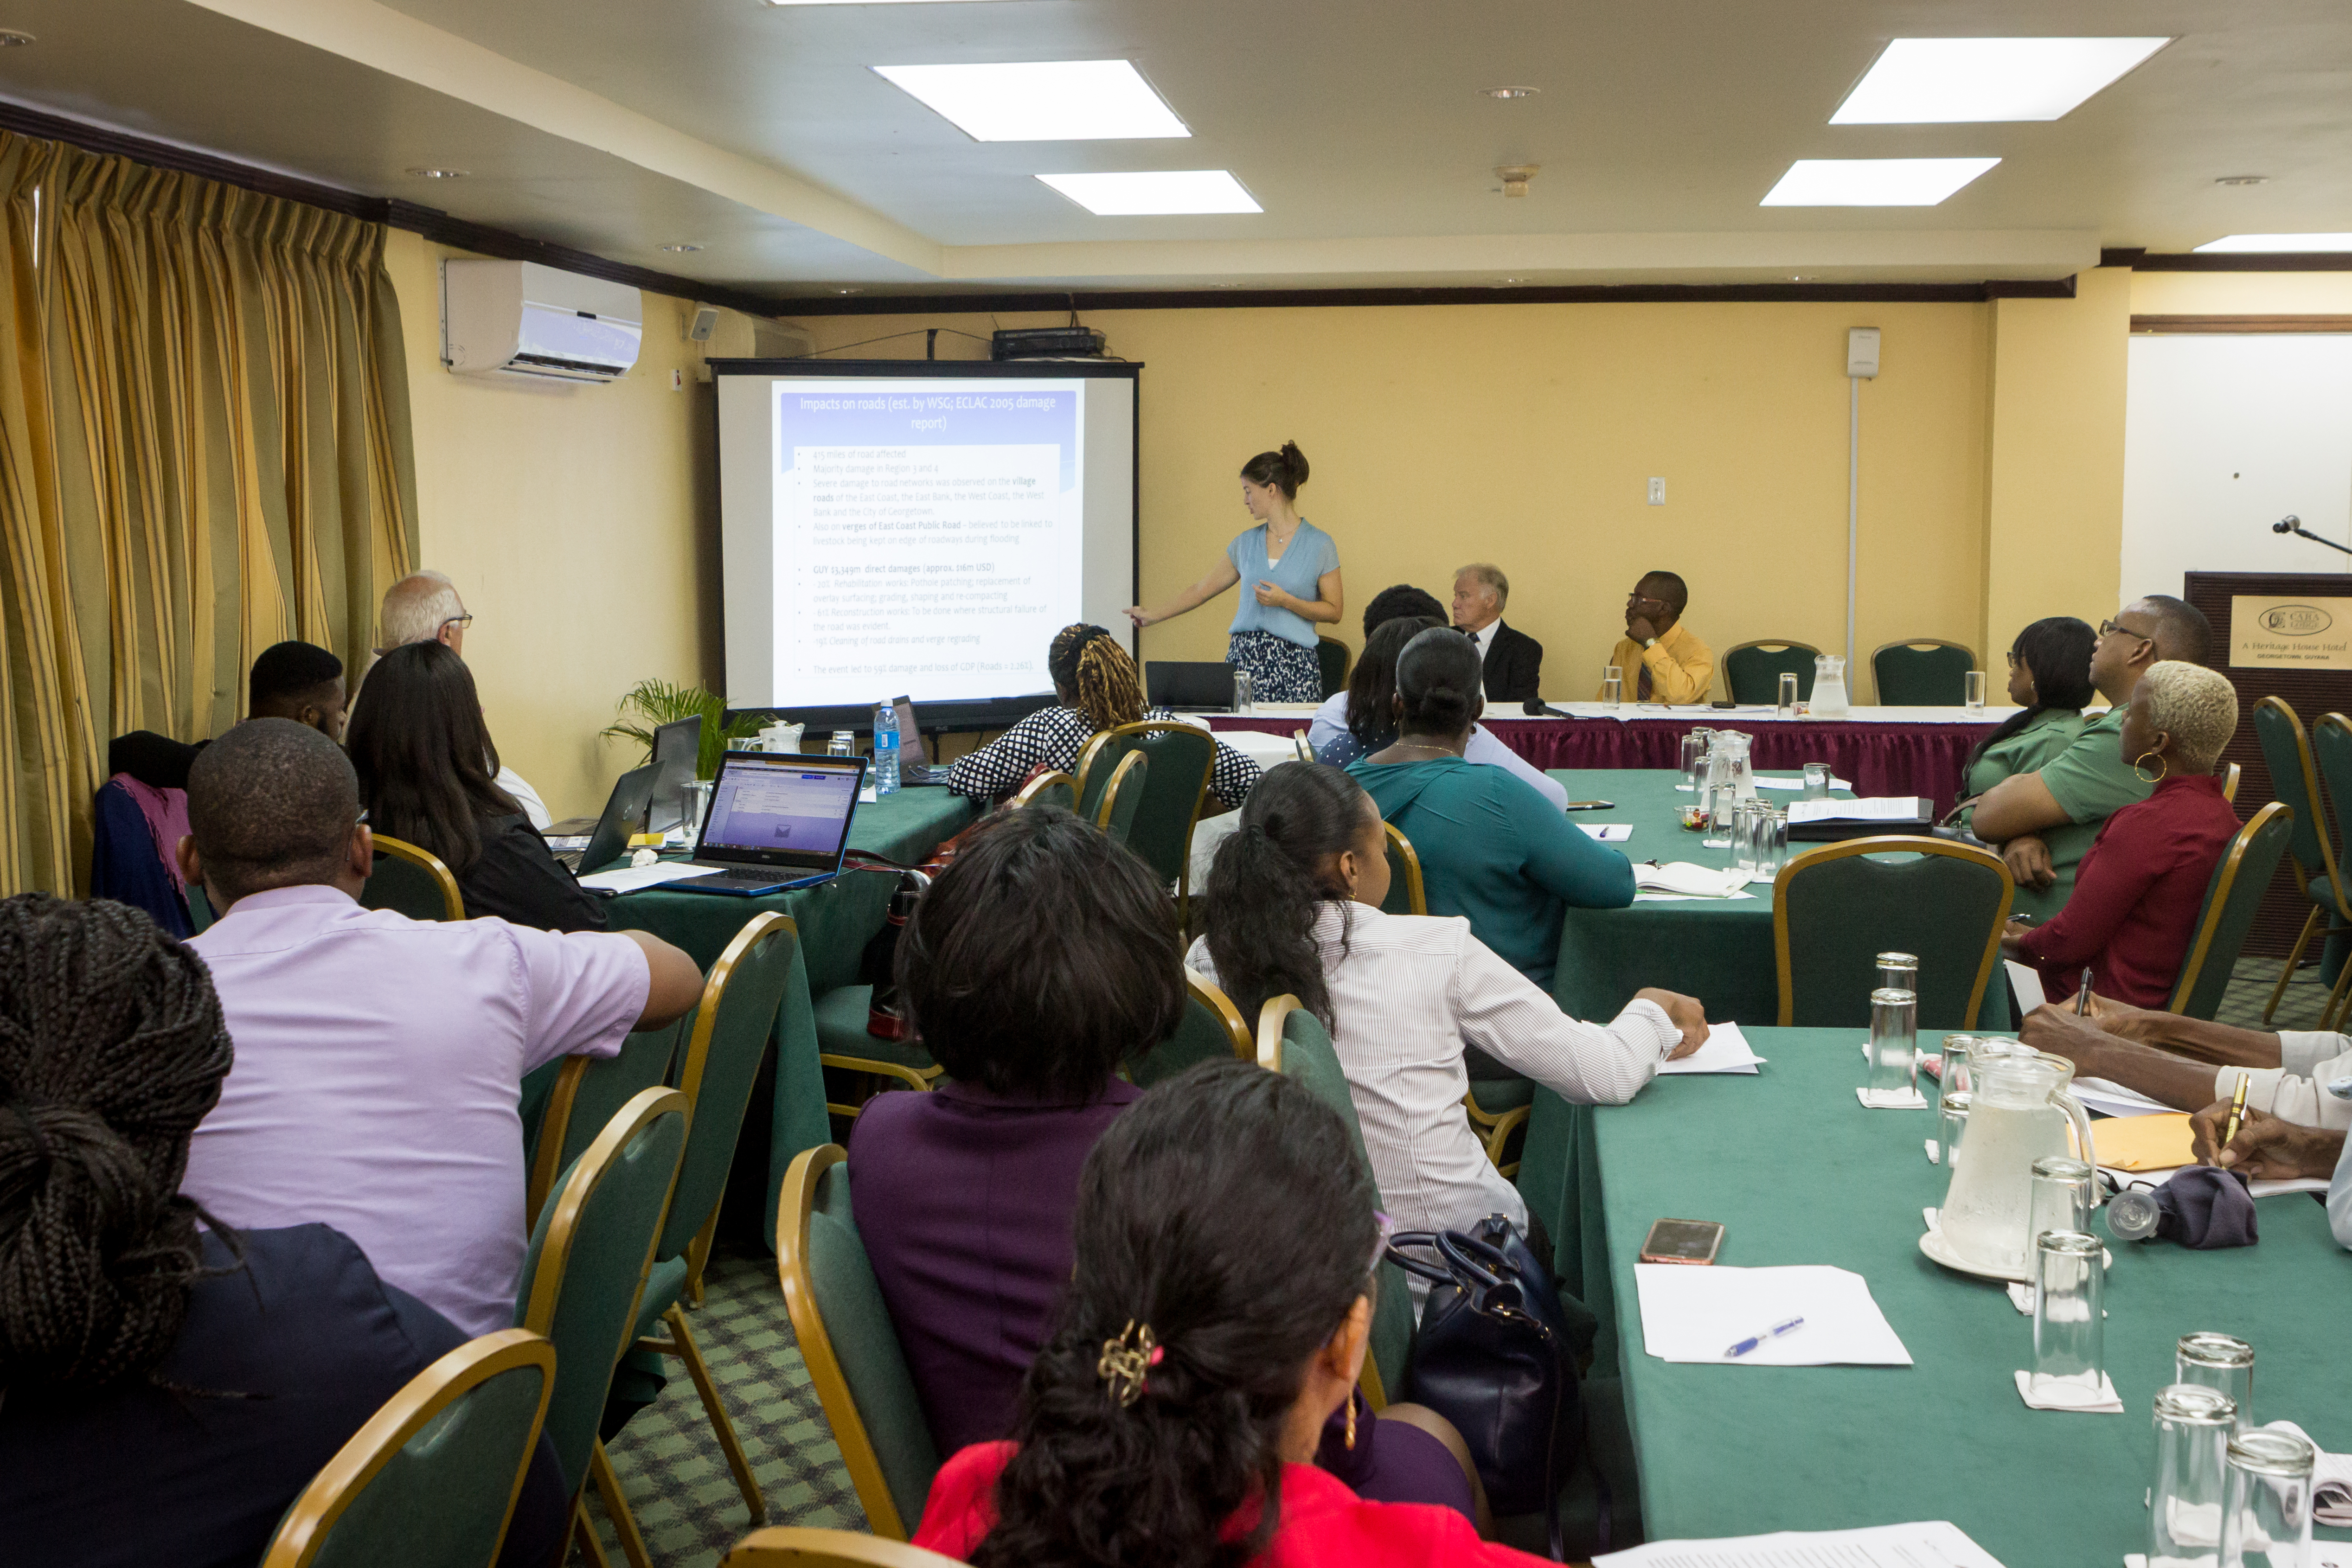 Stakeholders from several government ministries, including Public Infrastructure, Finance and Natural Resources, and the Central Housing and Planning Authority, listen to Olivia Palin as she quantifies the damage to Guyana’s road network following the 2005 floods during the Workshop on August 22, 2017.